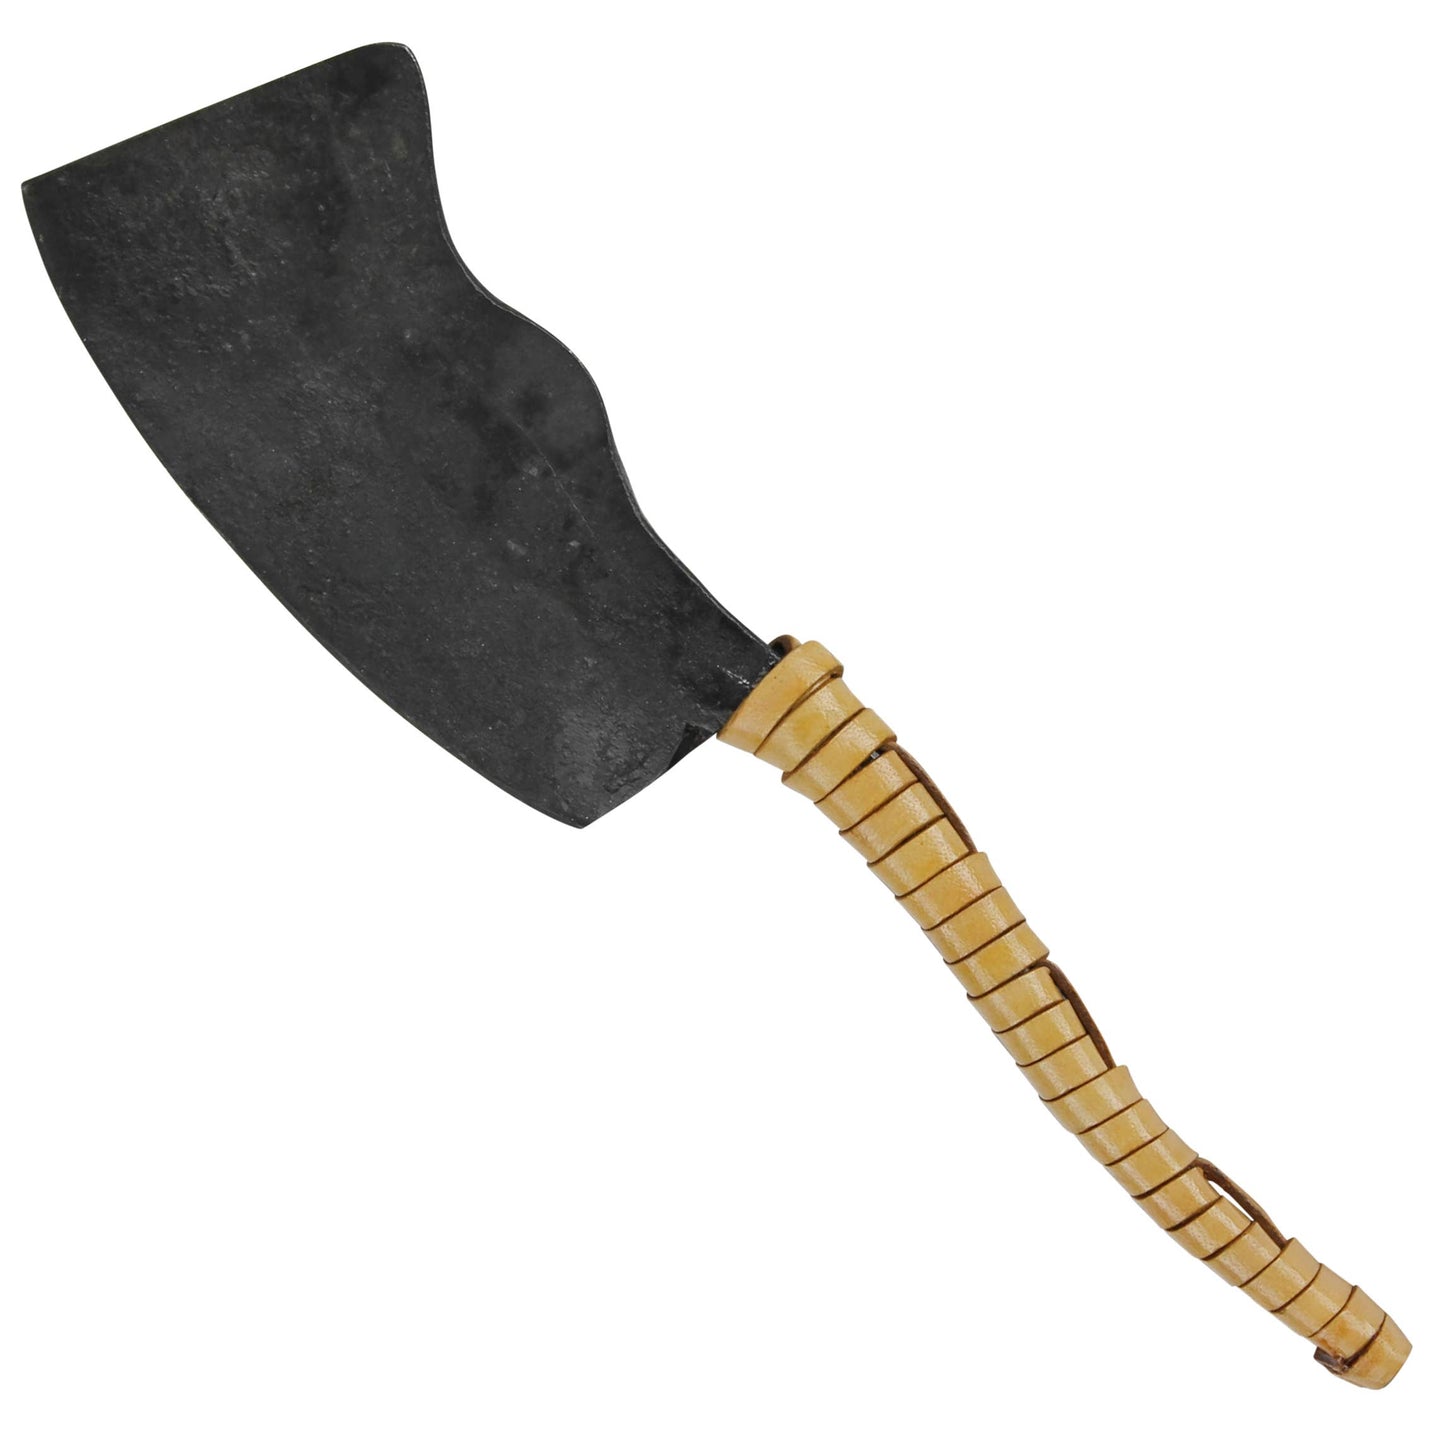 Iron Knife with Leather Handle